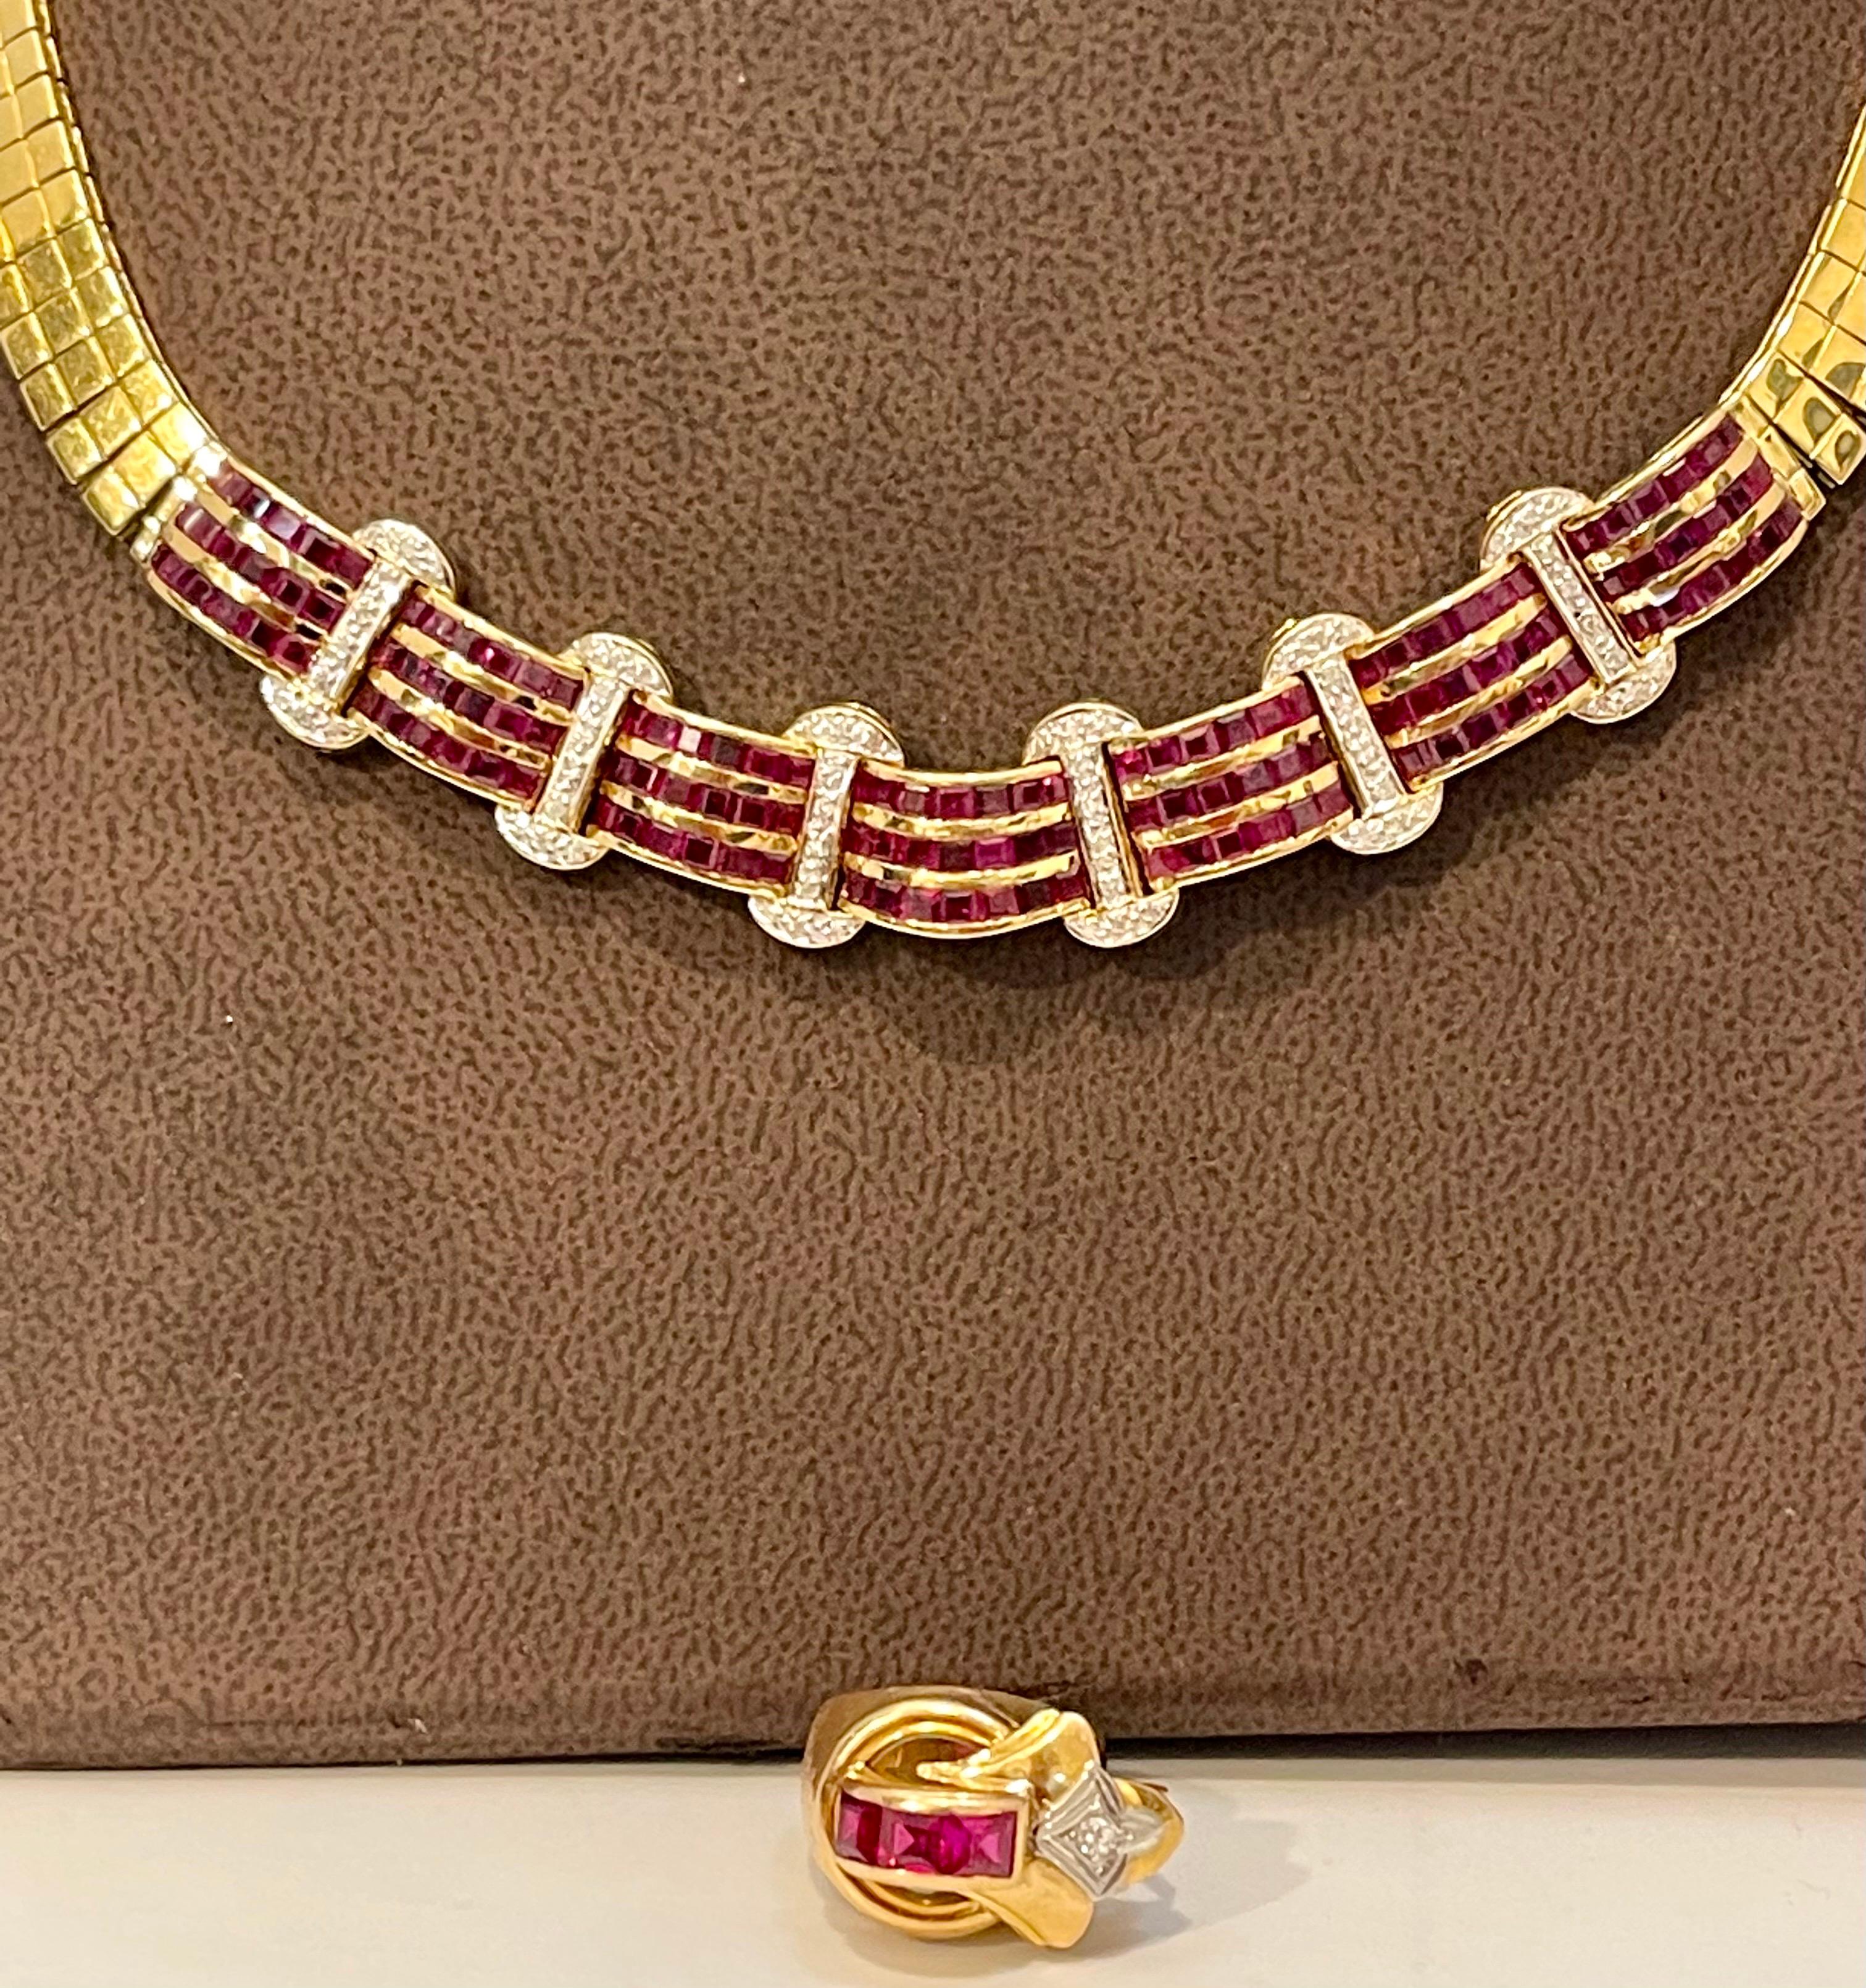 Natural 7 Ct Ruby and 2 Ct Diamond Necklace 18 Karat Yellow Gold With Ring 68 Grams
This Necklace   made out of 18 Karat  Yellow  gold . 
Necklace consisting of  6 stations of diamonds  and 7 sectors of invisible set Princess cut rubies
Total